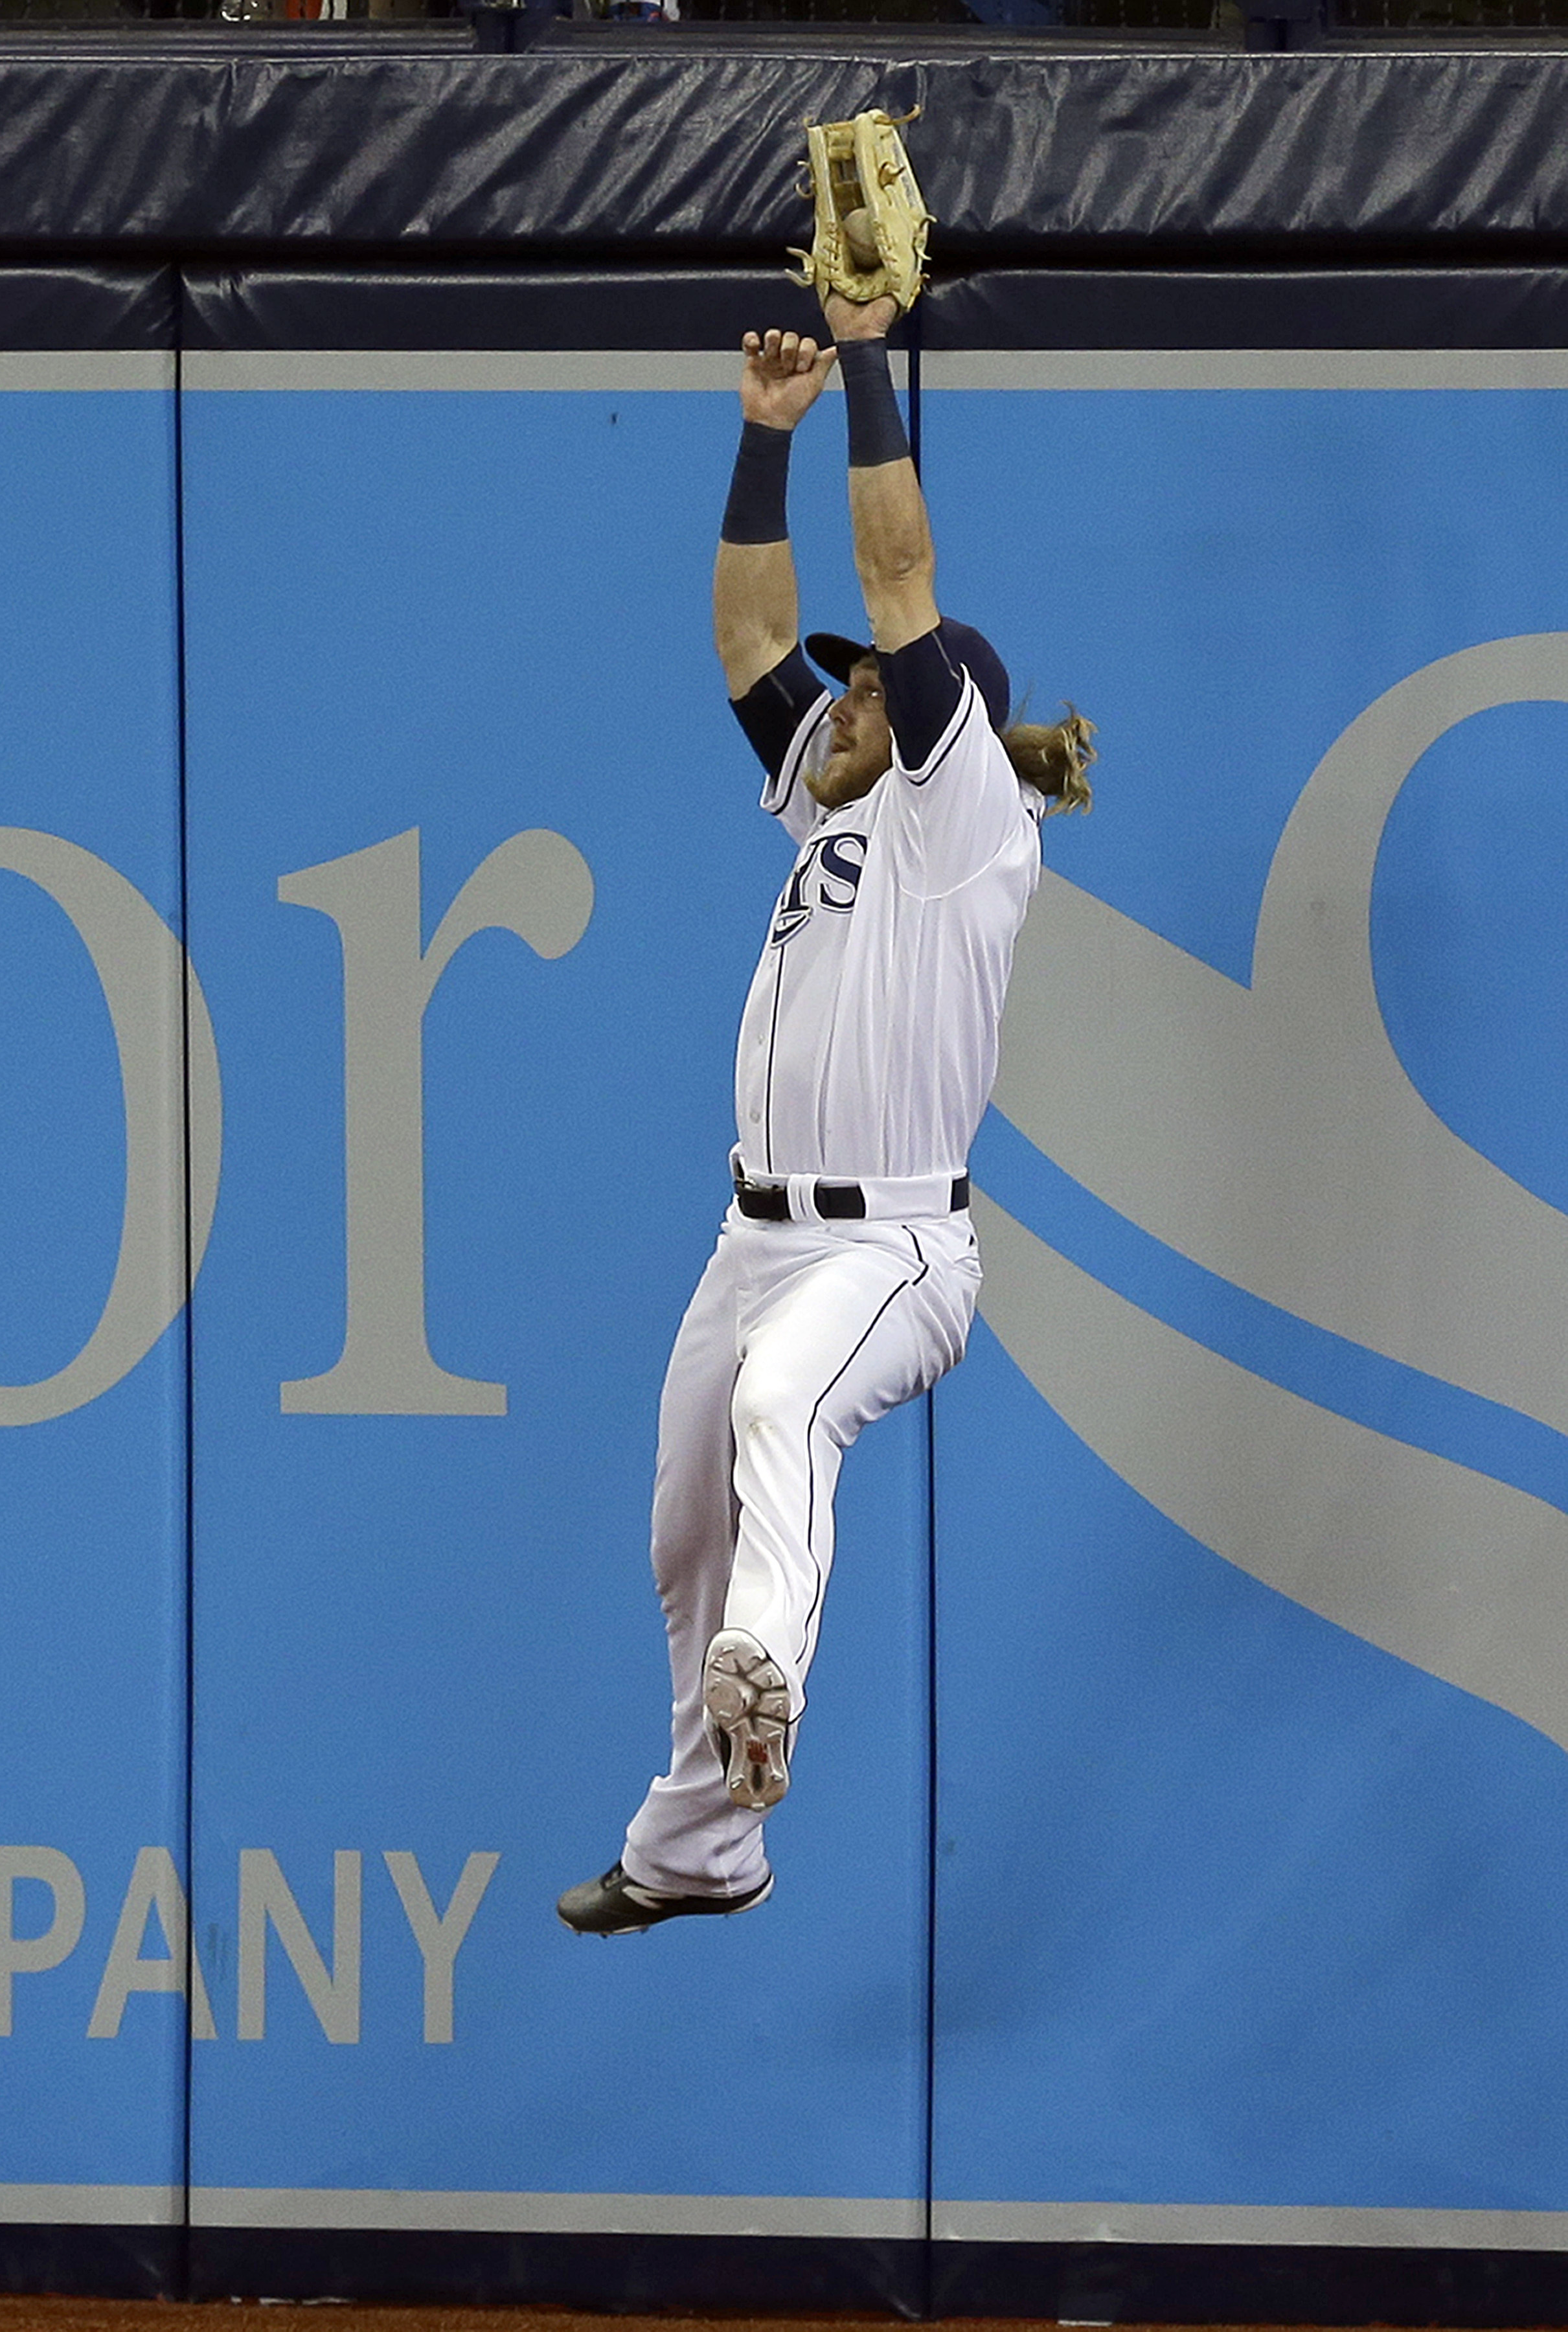 Mariners rally from 5-run deficit to beat Rays